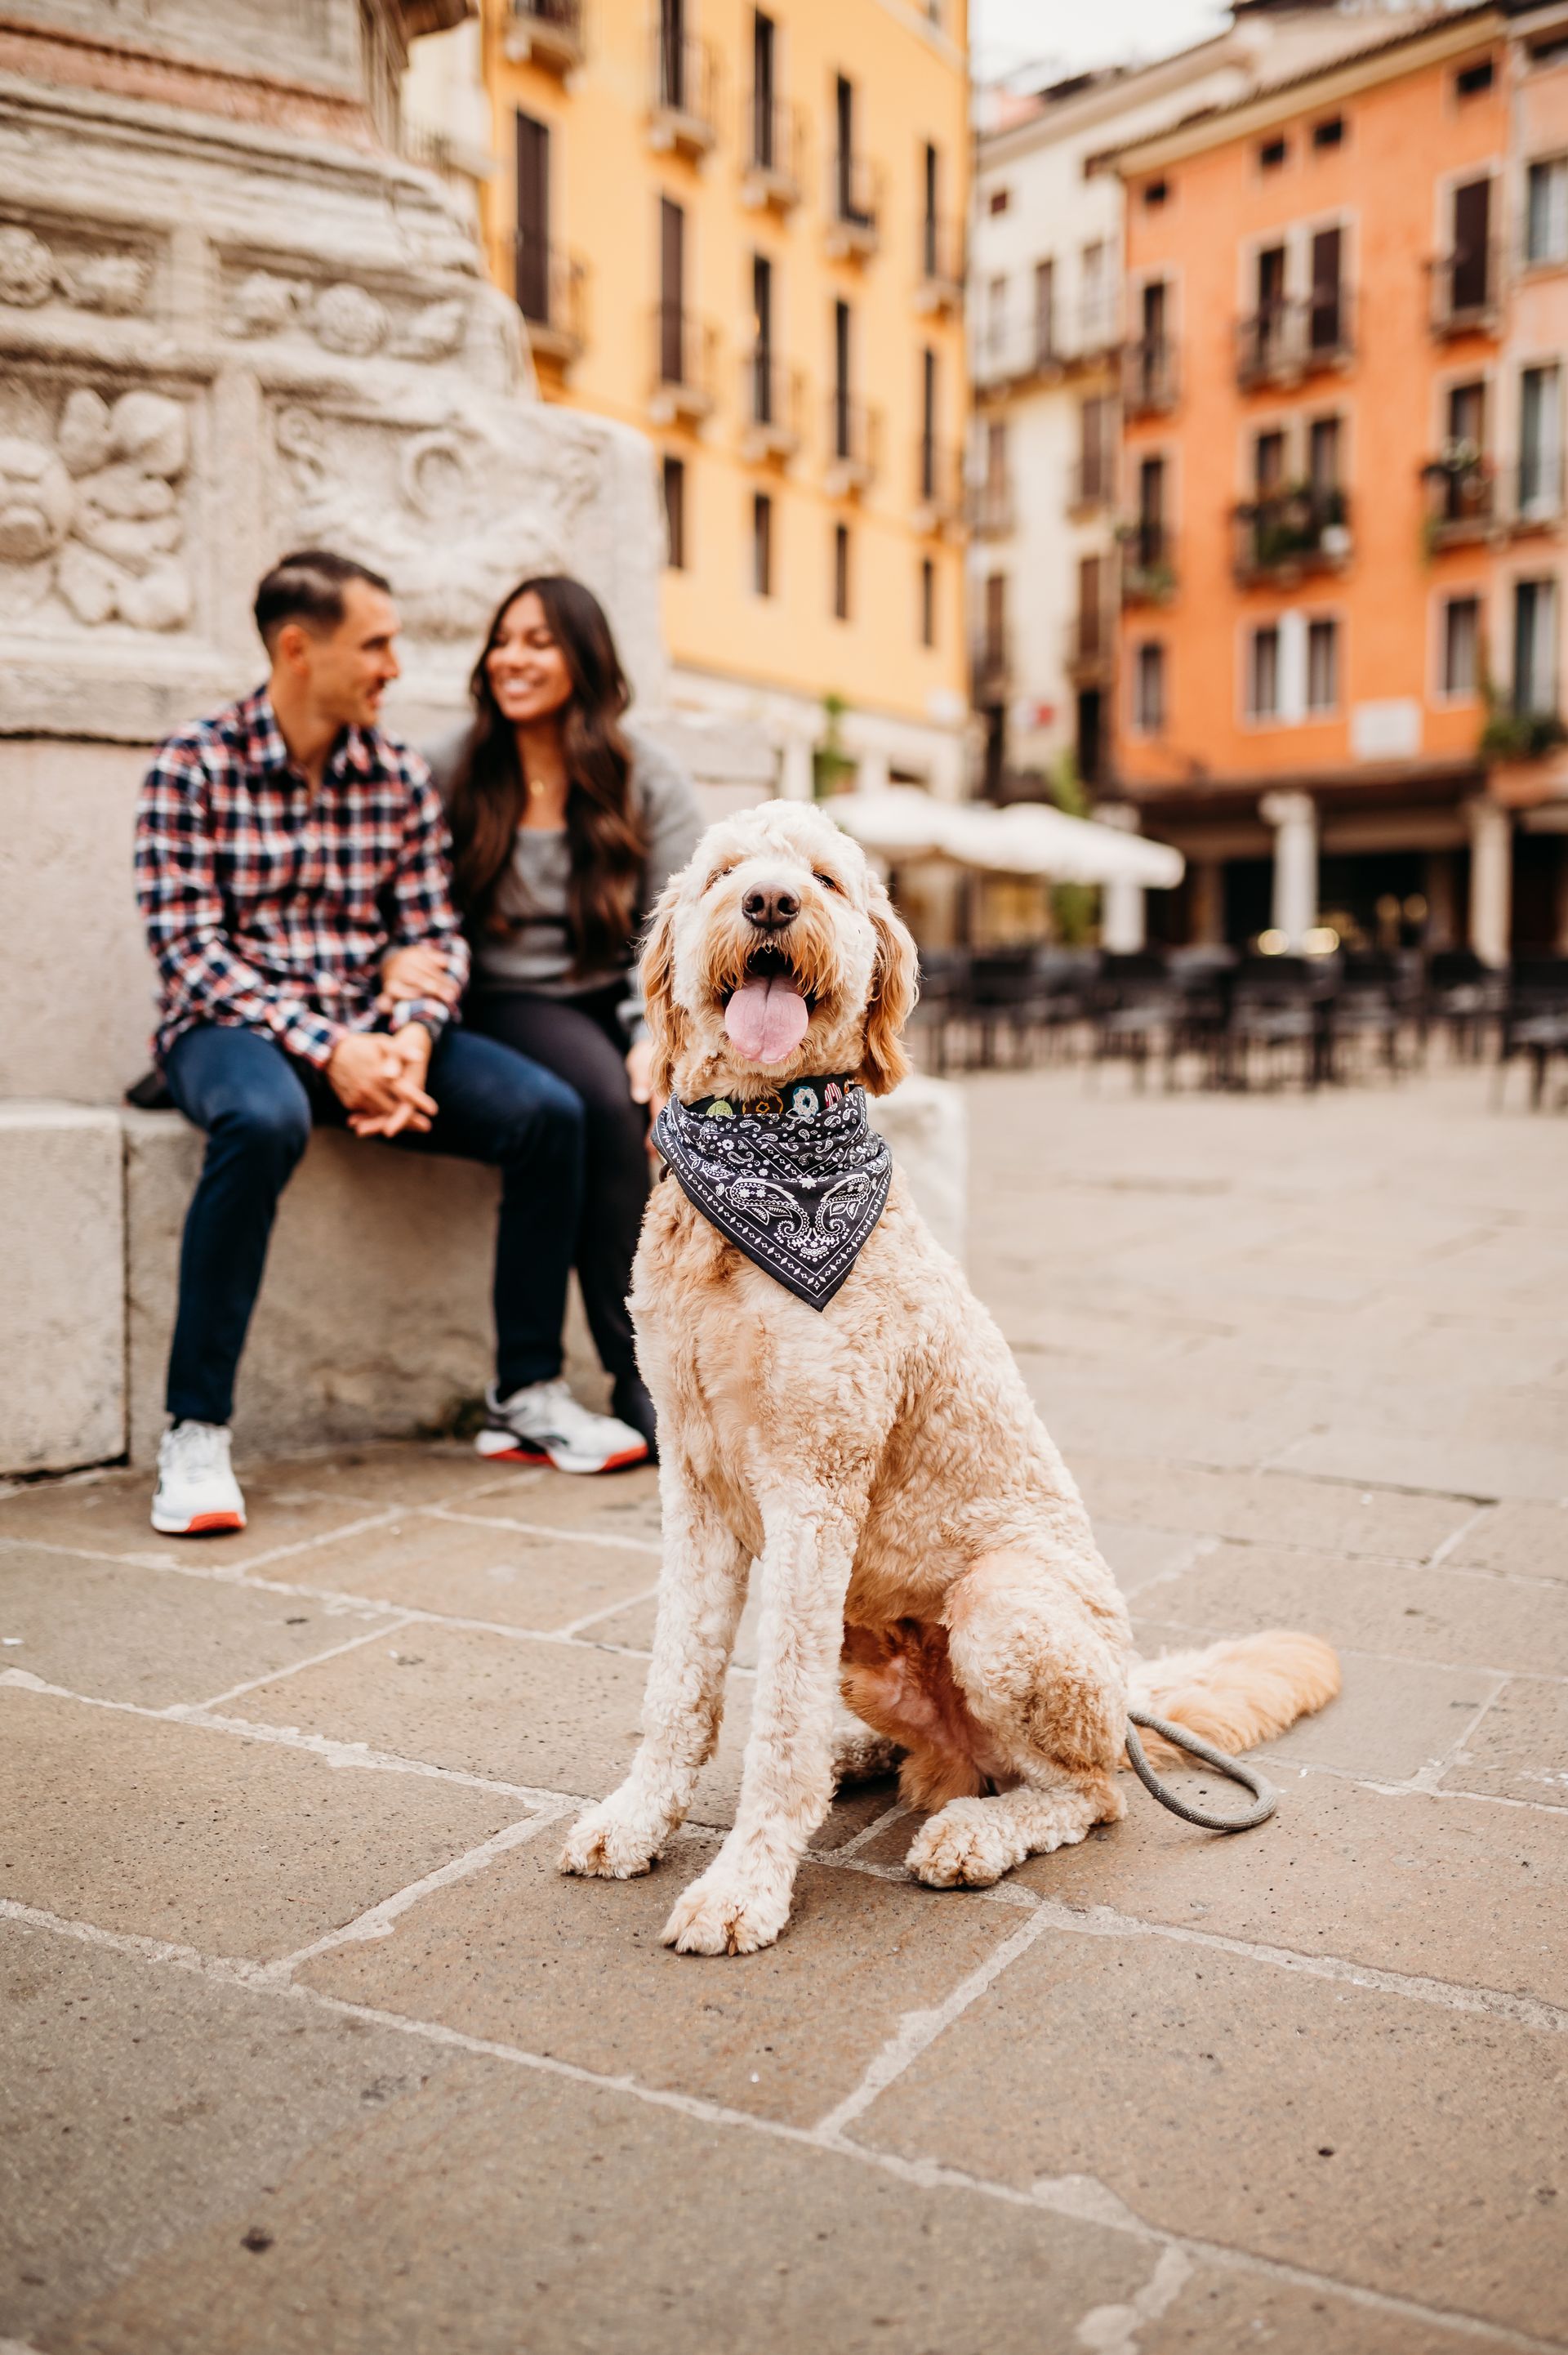 A man and woman are sitting on a ledge next to a dog wearing a bandana.